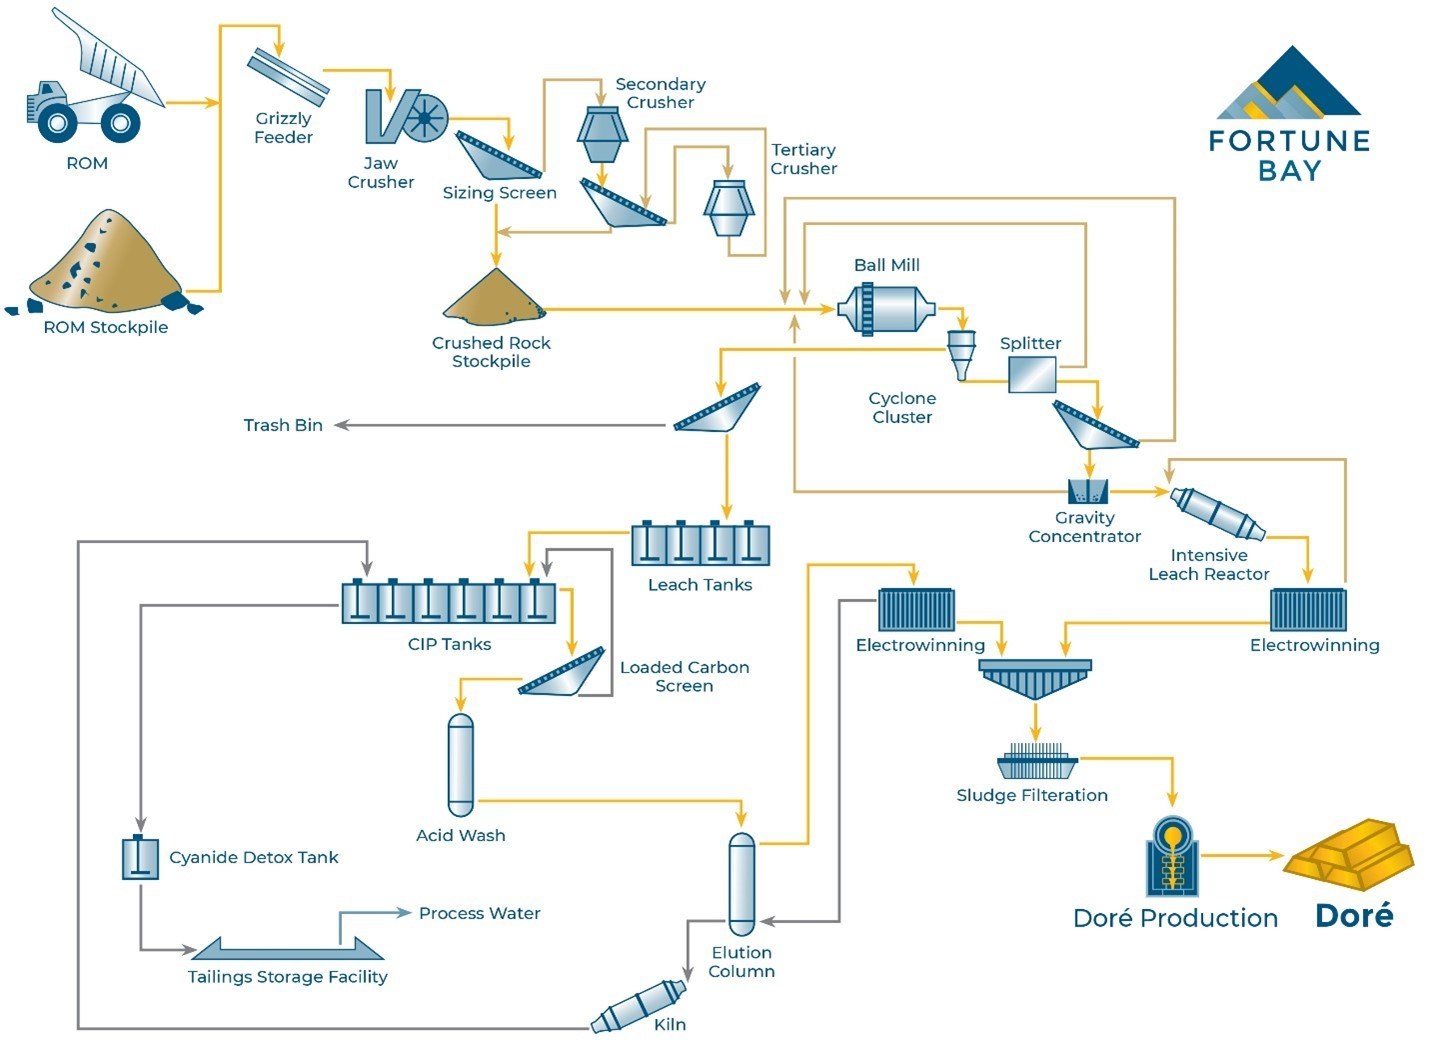 Figure 5: Goldfields Simplified Process Flowsheet (CNW Group/Fortune Bay Corp.)